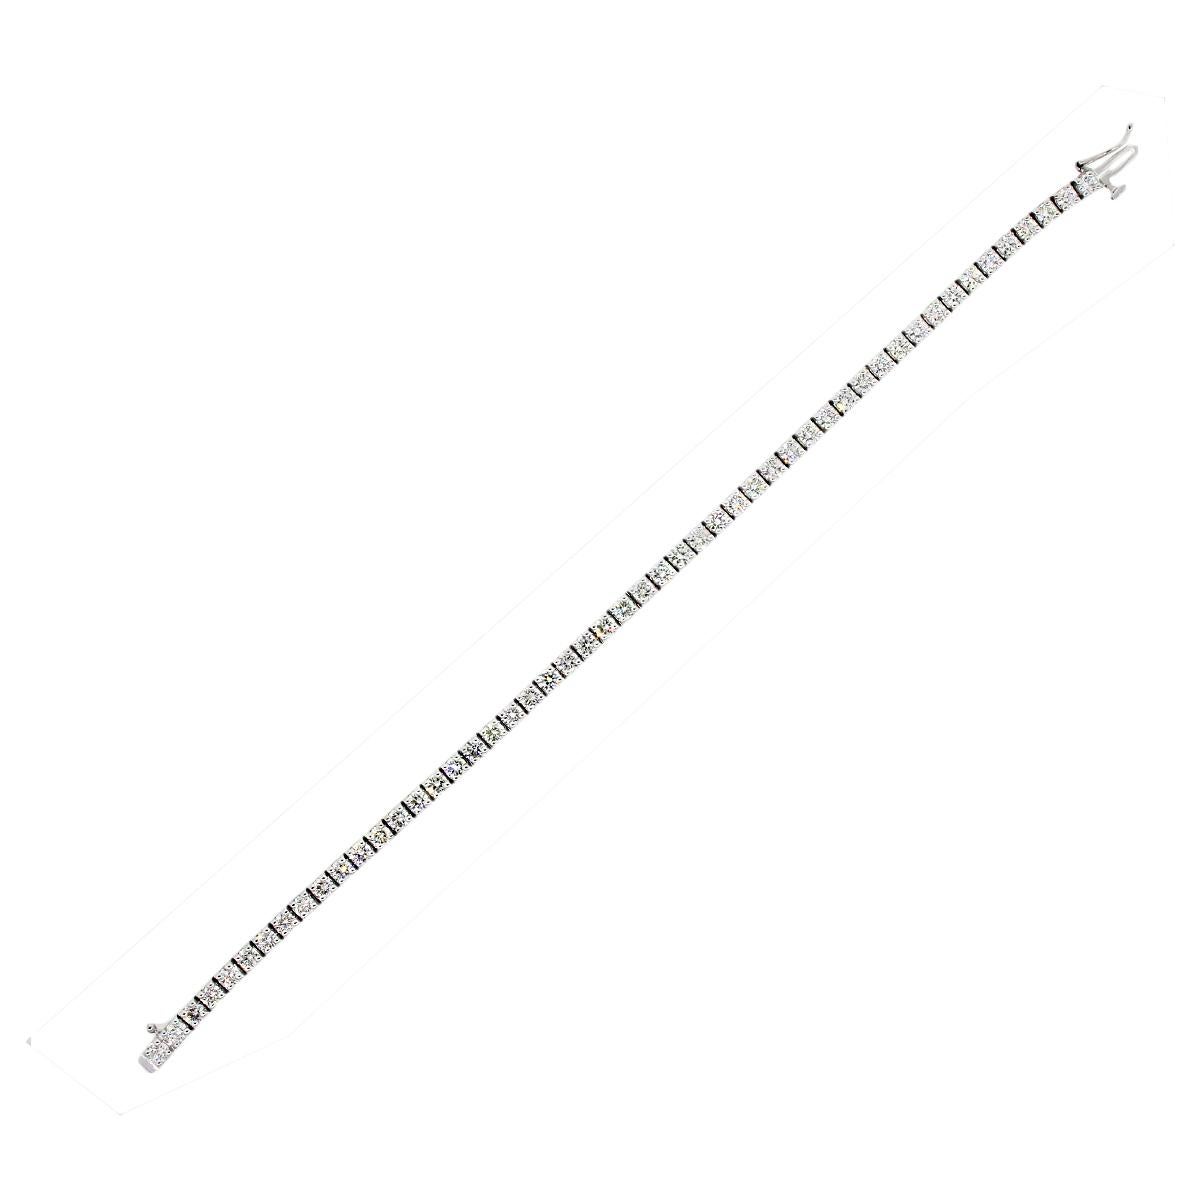 Material: 14k white gold
Diamond Details: Approximately 5.10ctw of Round Diamonds. Diamonds are G/H in color and VS in clarity.
Clasp: Tongue in box with safety
Measurement: 7″
Total Weight: 10.9g (7dwt)
SKU: A30312065